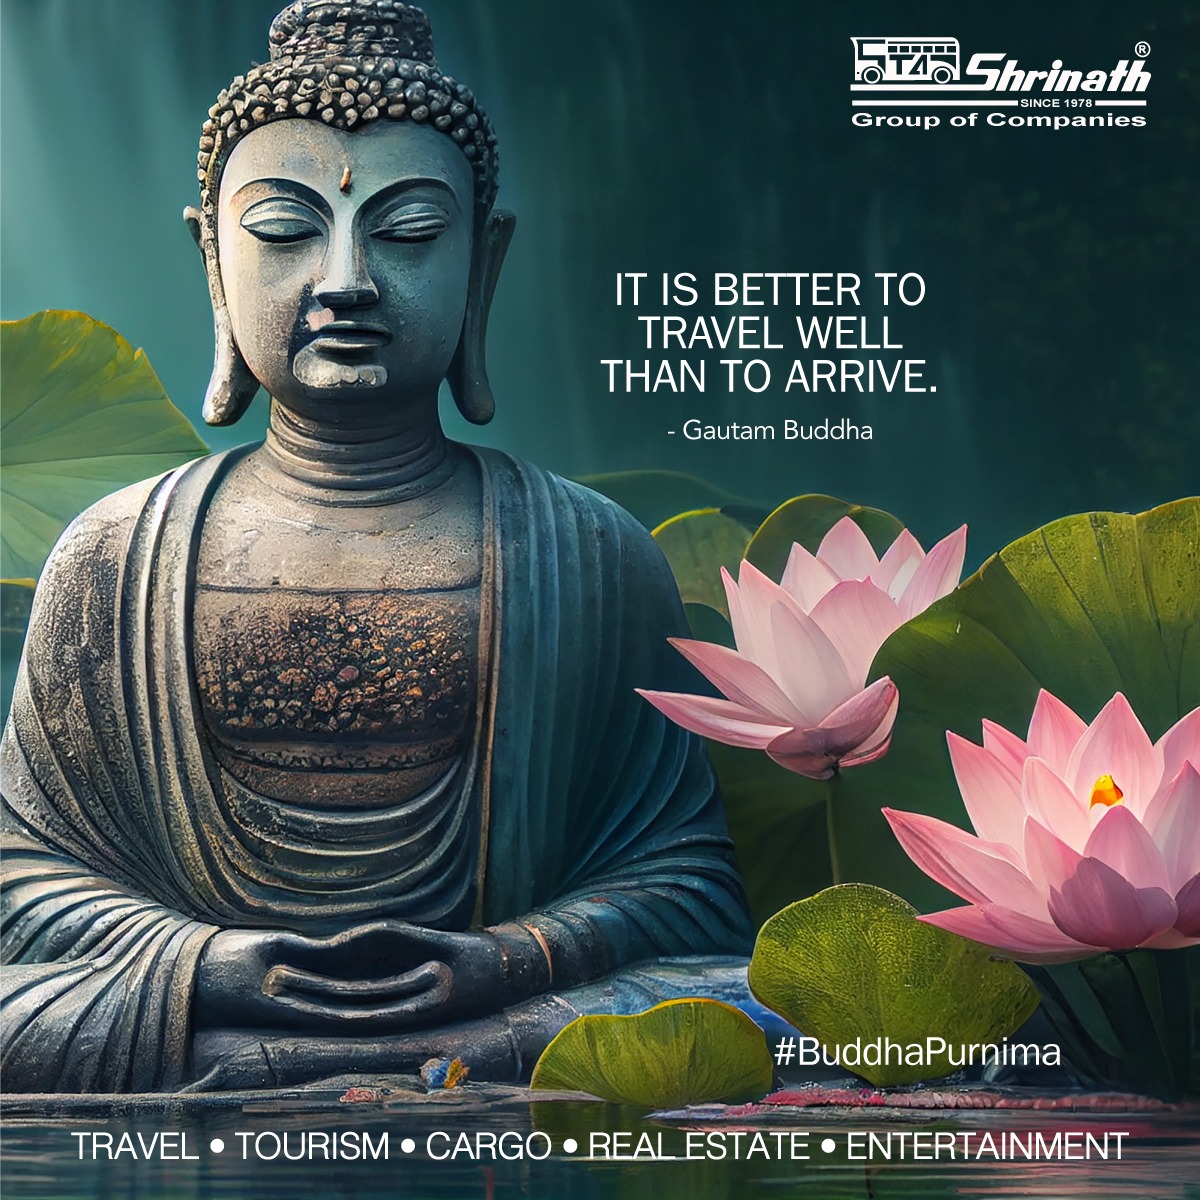 #BuddhaPurnima  #BuddhaPurnima2023 #Buddha #BuddhaJayanti #Enlightenment

May Buddha Purnima herald a new phase of happiness, contentment, and good health.

#ShrinathTravelAgency #ShrinathTourism #ShrinathCargo #BusTickets #Travel #Tourism #Journey #BuddhaQuotes #Buddhism #Love